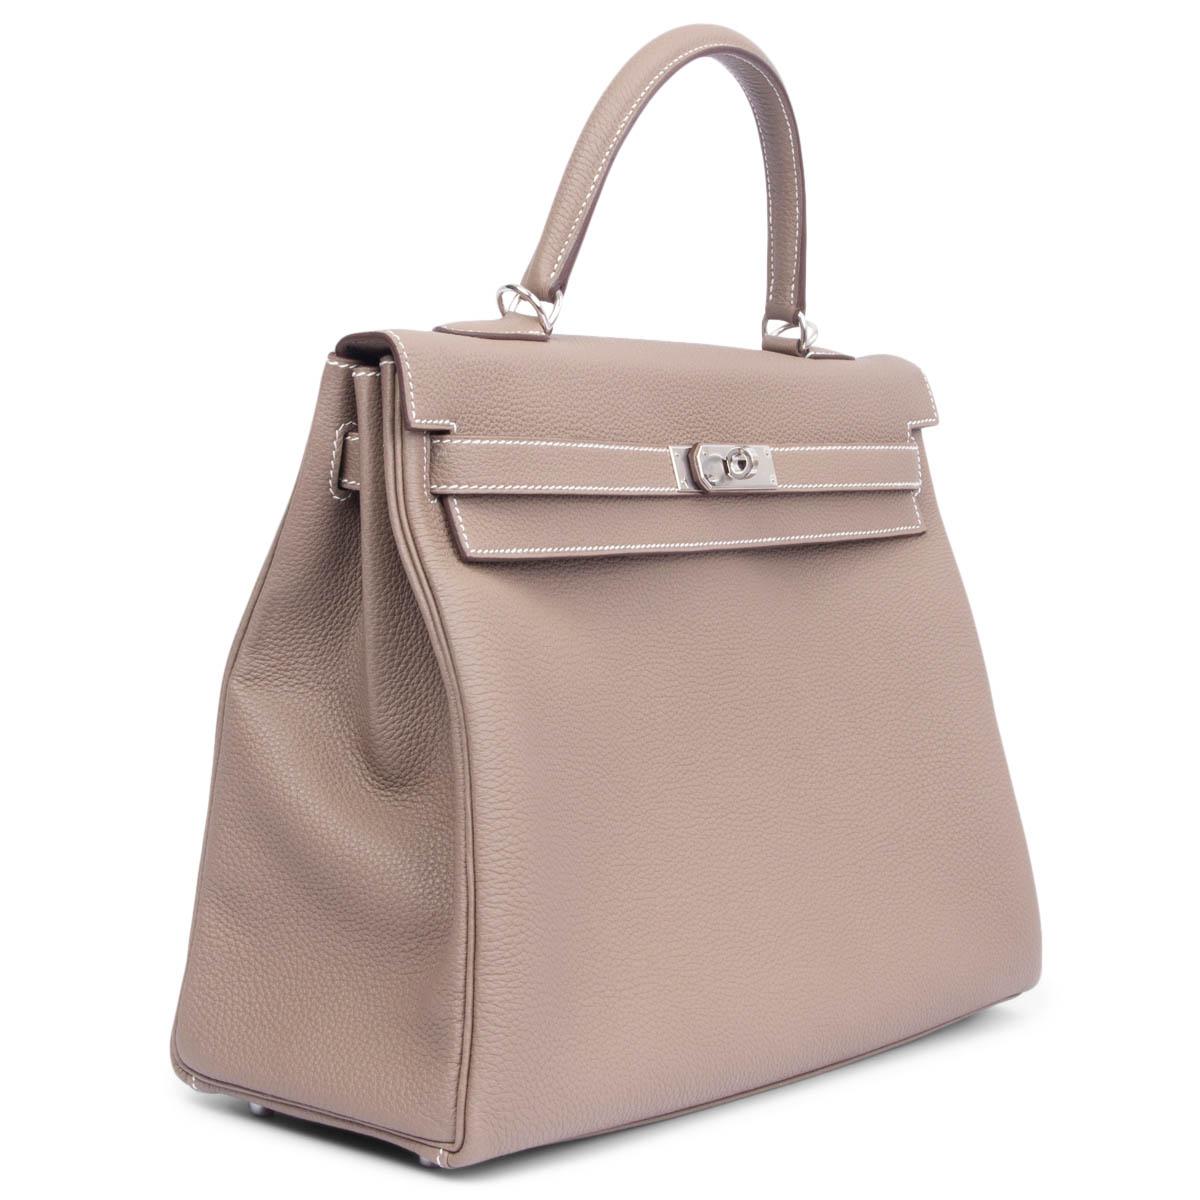 100% authentic Hermès Kelly 35 Retourne bag in Etoupe Togo leather with contrasting white stitching palladium hardware. Lined in Chèvre (goat skin) leather with two open pockets against the front and a zipper pocket against the back. Brand new -